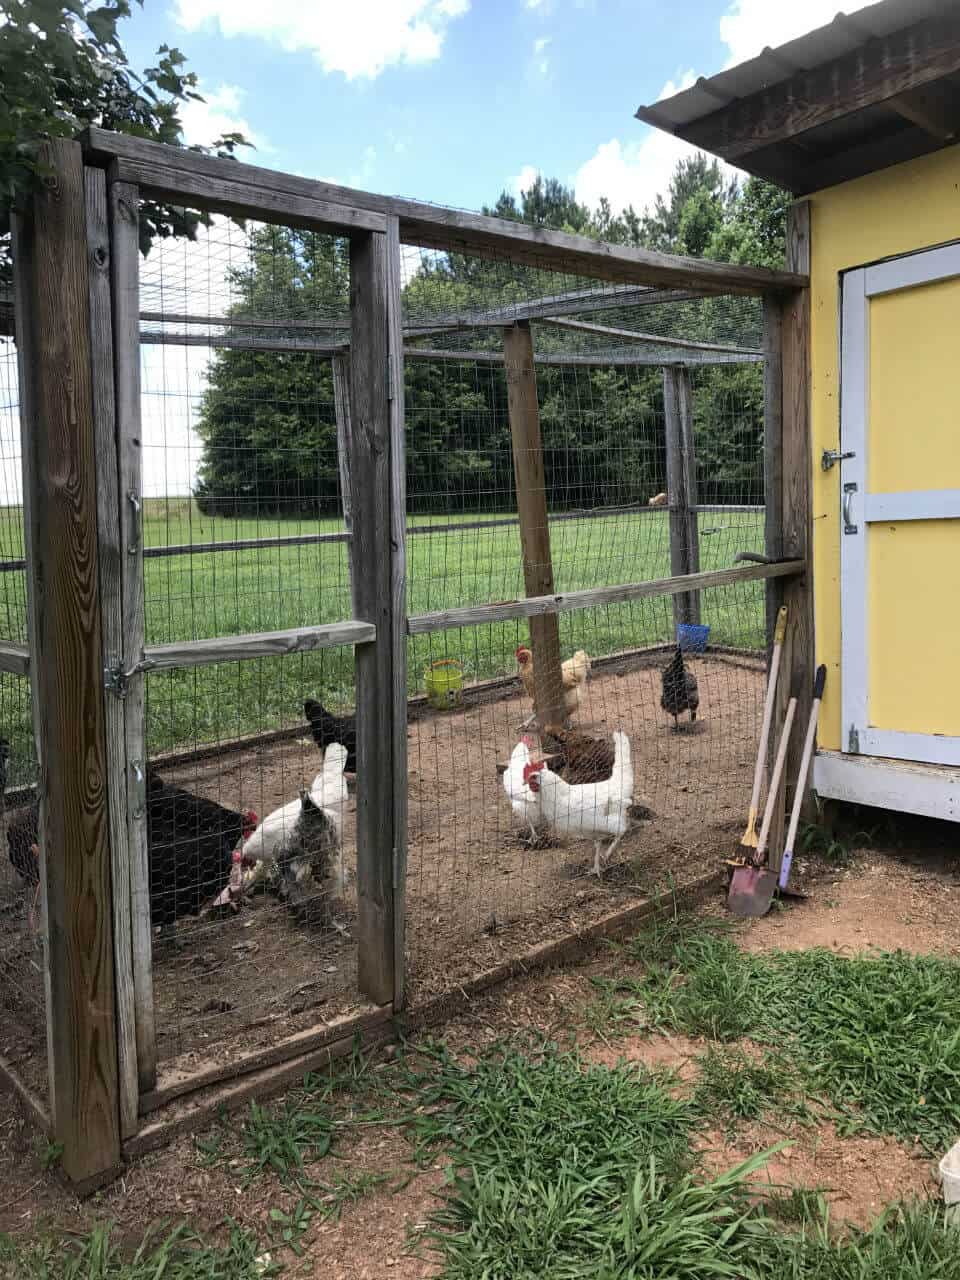 Chickens playing in their enclosed run.